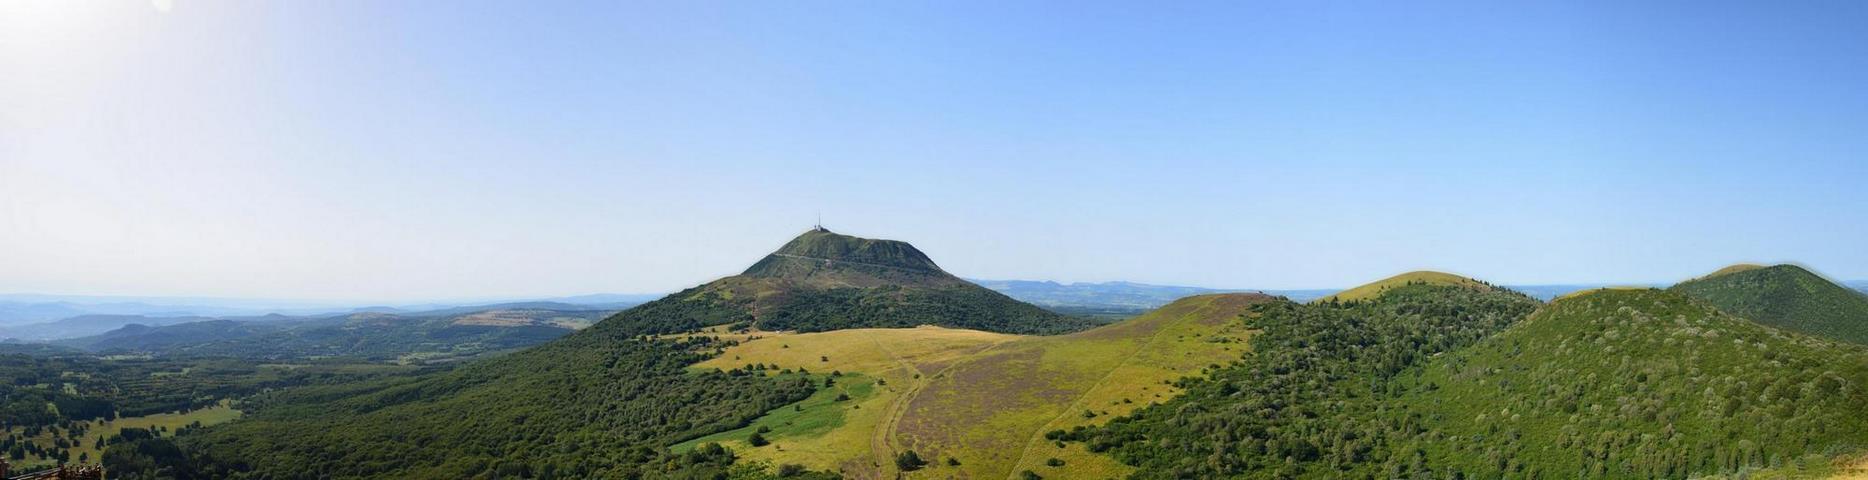 Panorama of the Puy de Dôme in the Massif Central